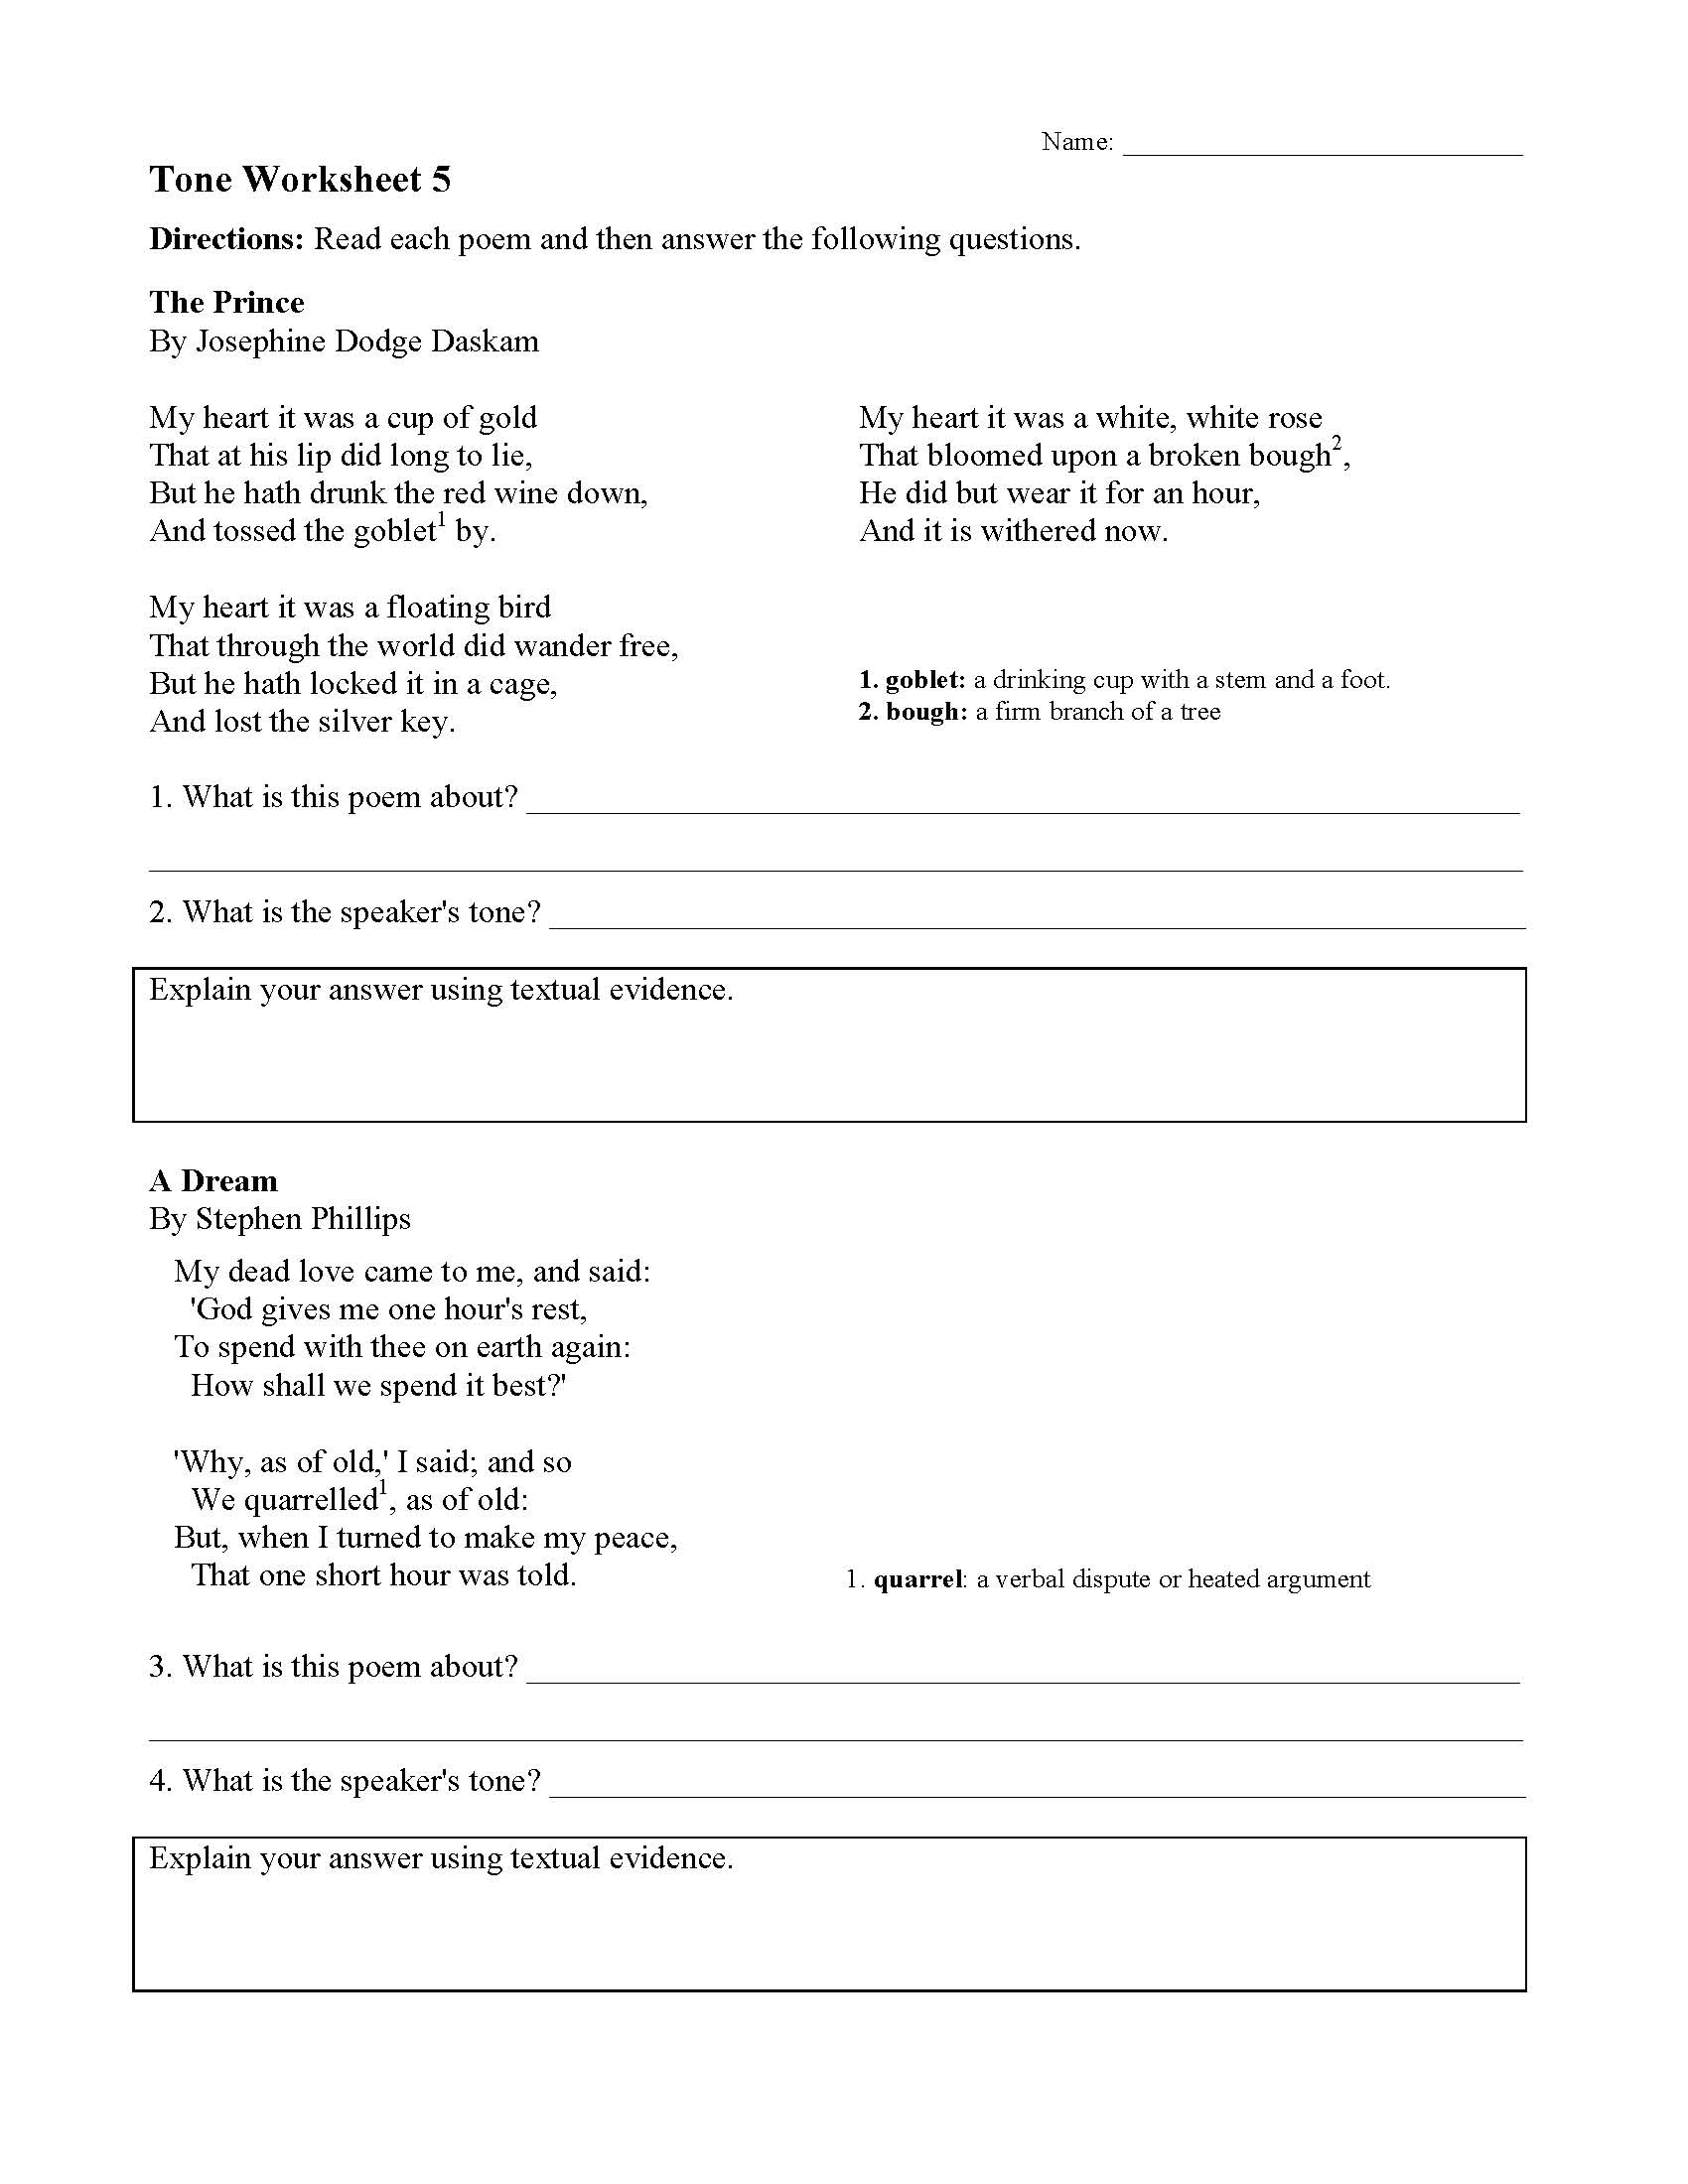 This is a preview image of Tone Worksheet 5. Click on it to enlarge it or view the source file.